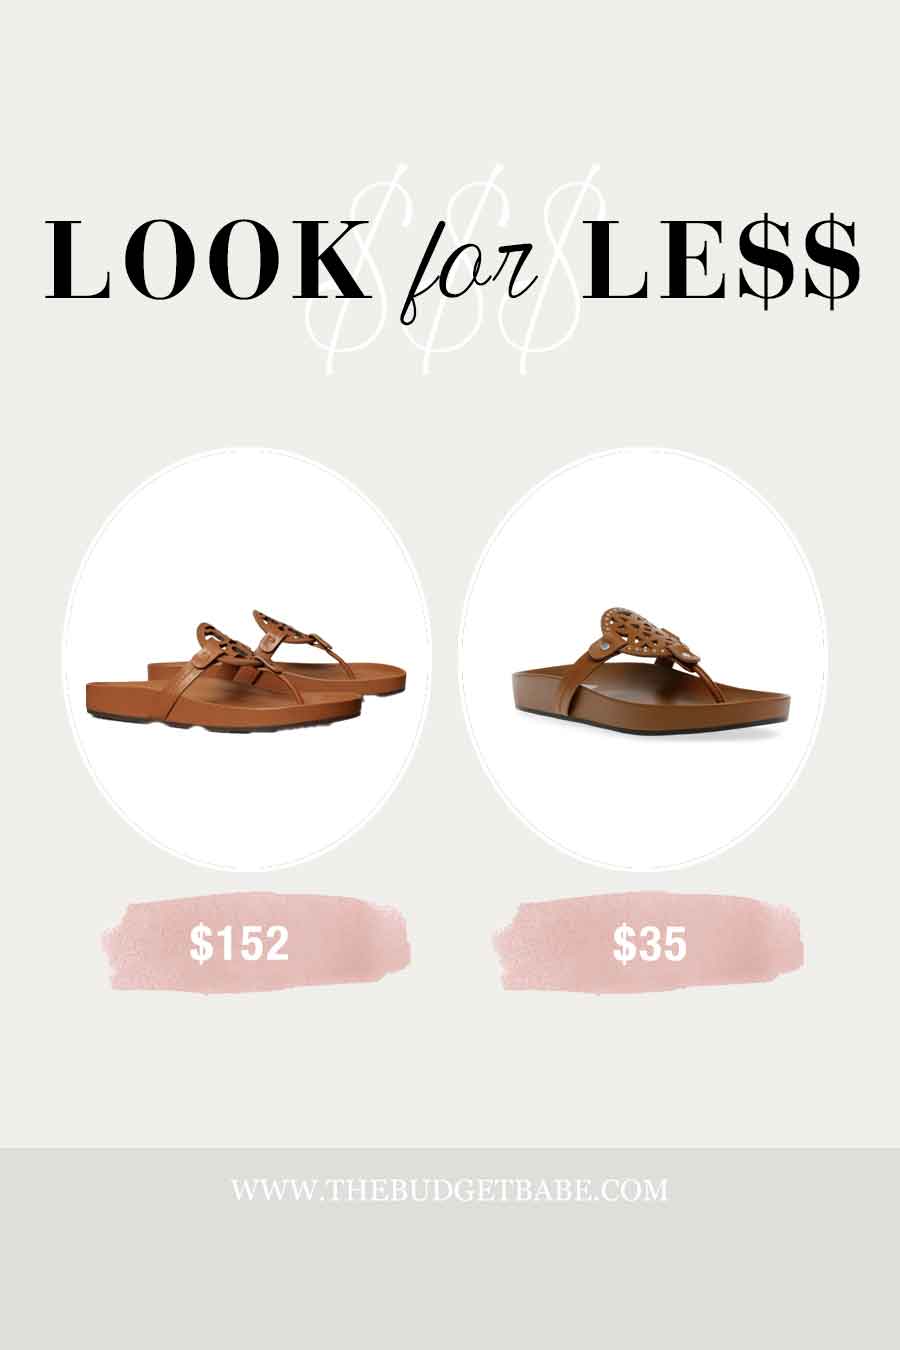 Tory Burch Miller Cloud Sandals Look for Less